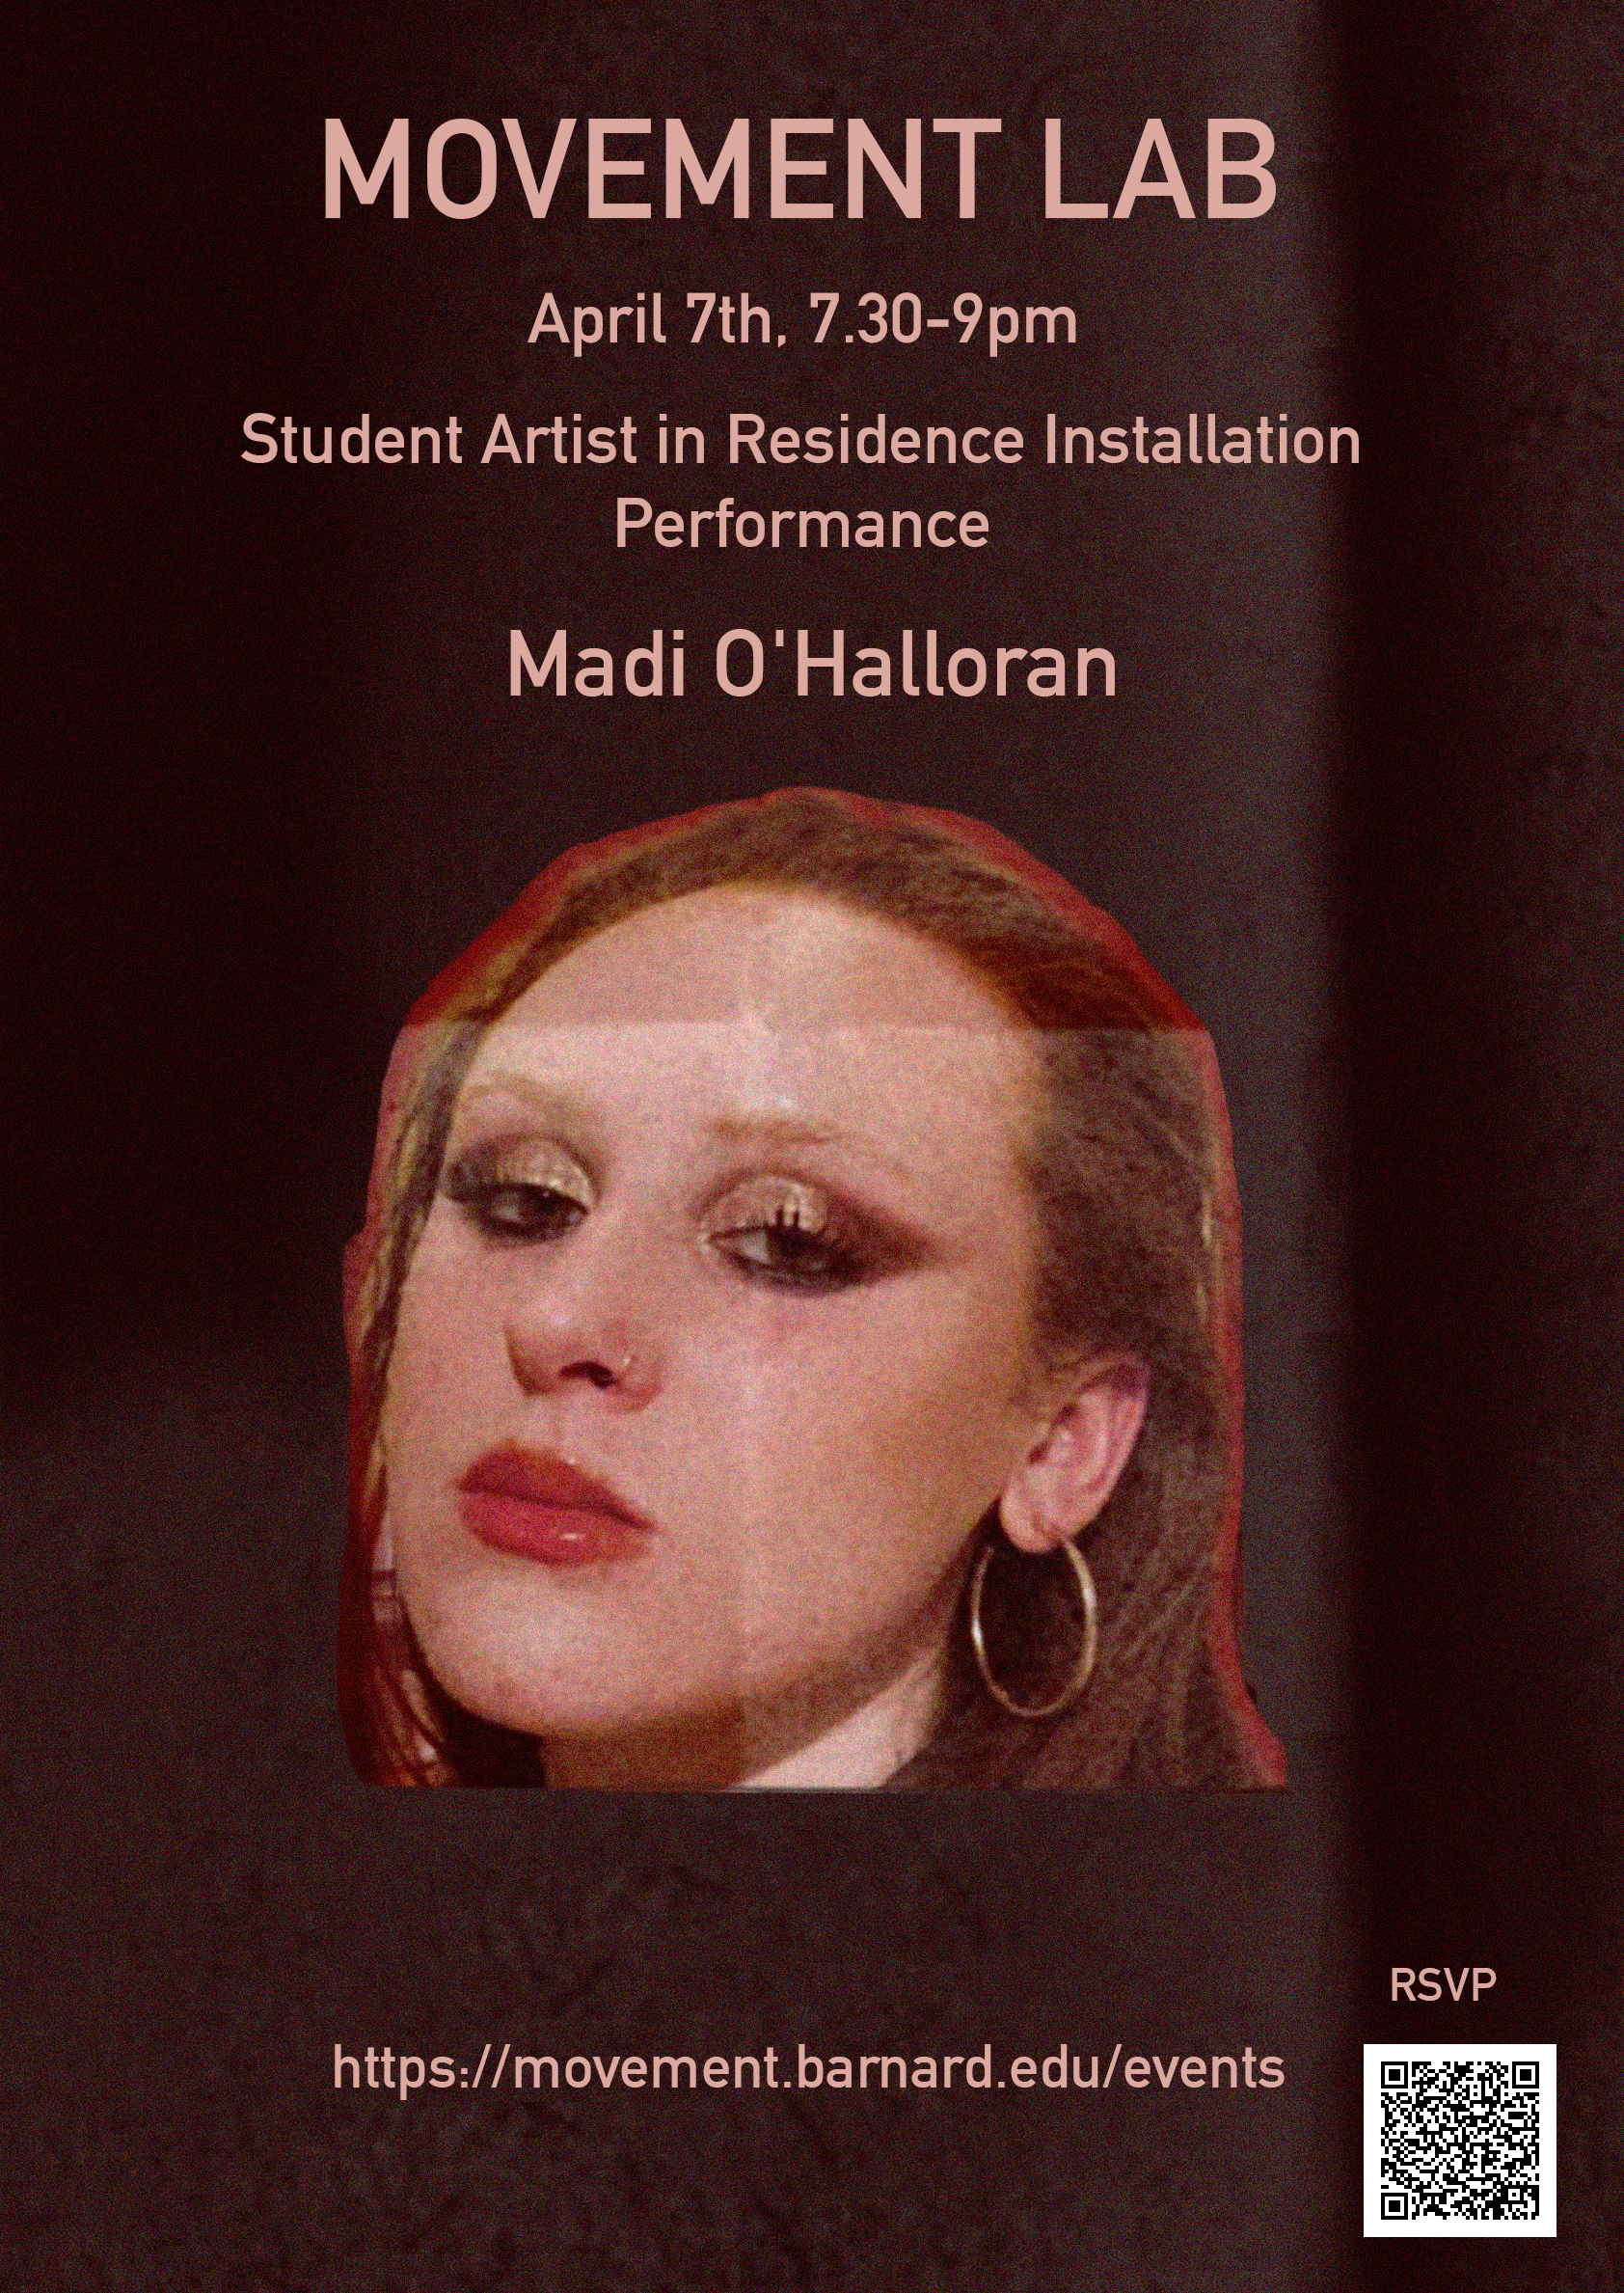 A poster promoting Mado O'Halloran's installation performance featuring a cut-out image of her face on a maroon background